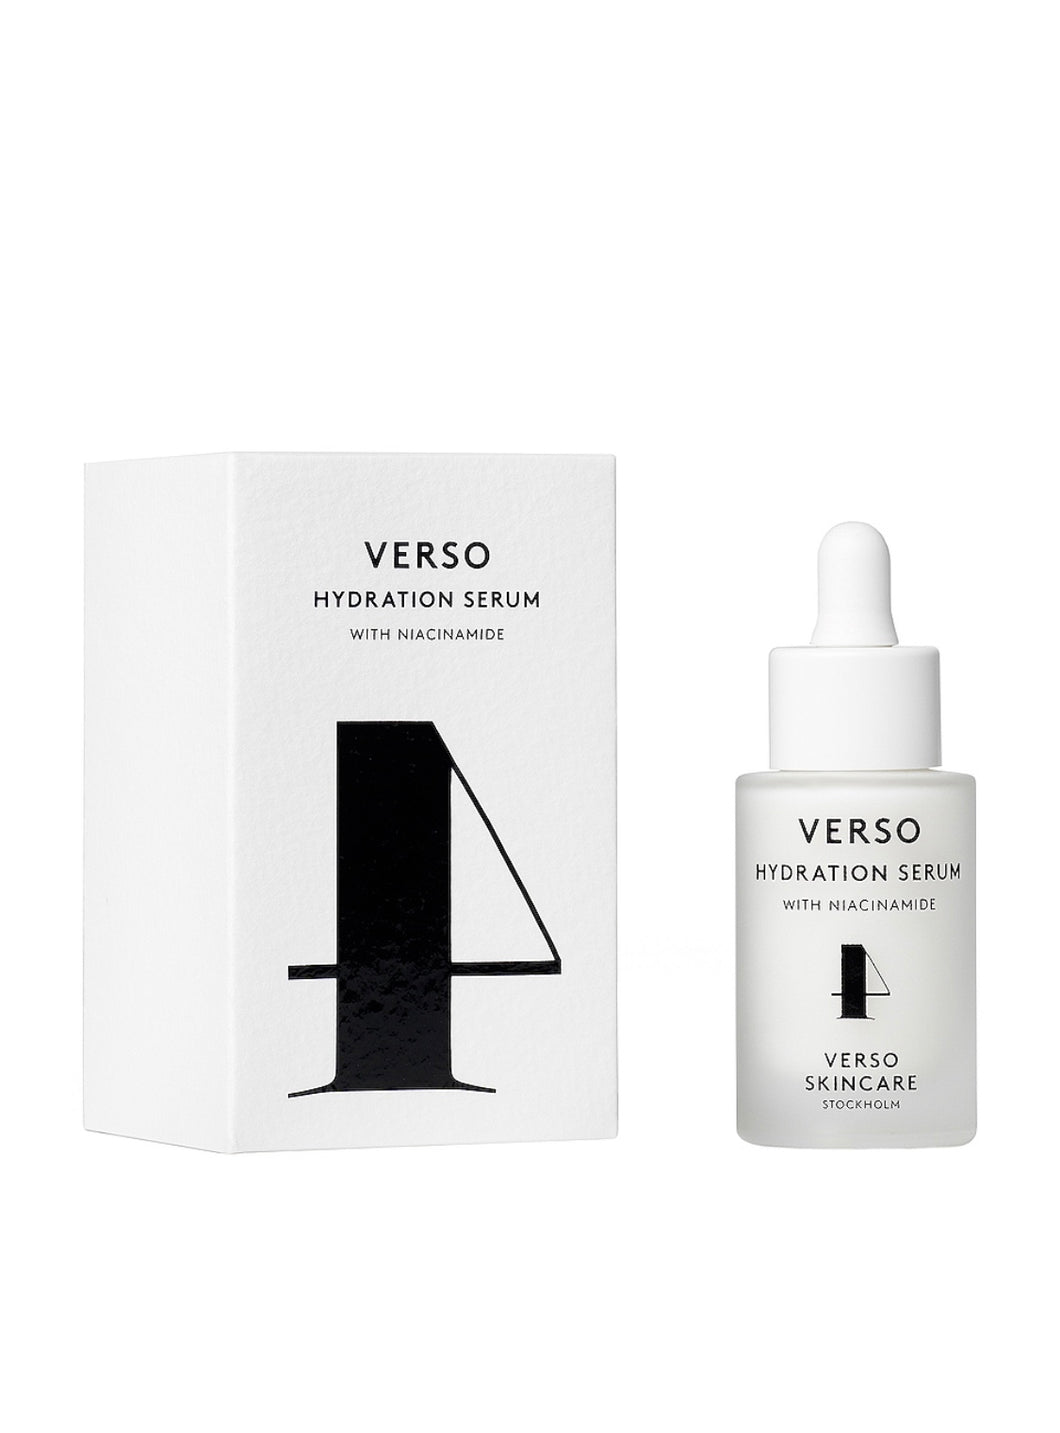 A HYDRATING AND BARRIER REPAIRING SERUM WITH NIACINAMIDE Verso Hydration Serum provides optimal and immediate moisturization, long-term hydration and continuous skin barrier repair for dry skin. By effectively preventing the skin from drying out this serum keeps the skin smooth and rejuvenated.